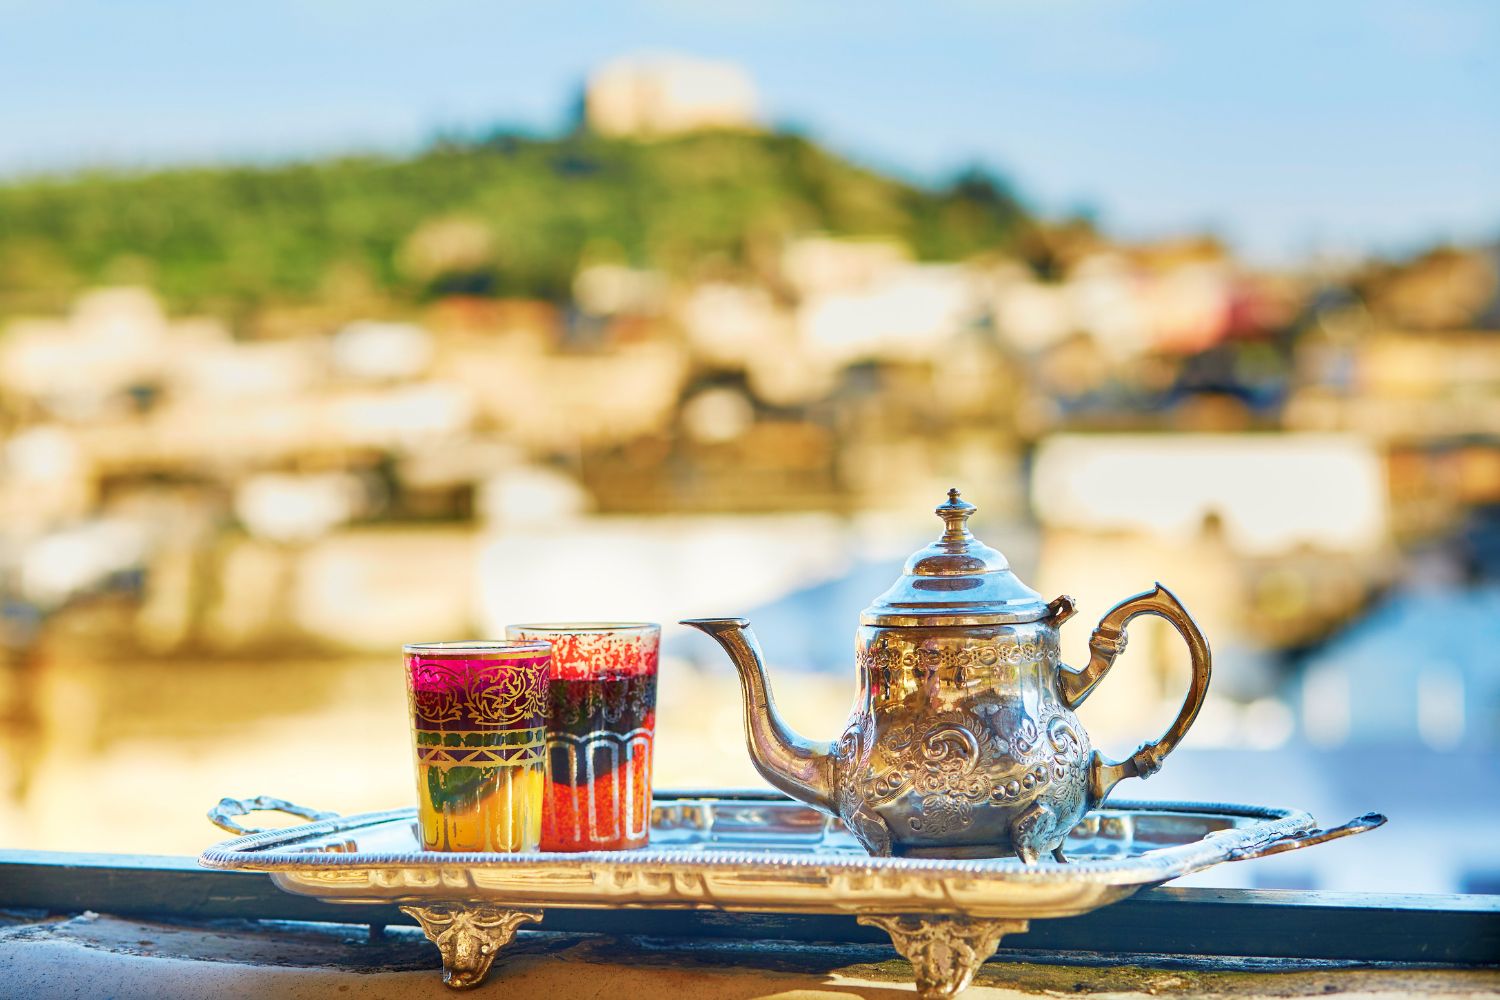 Moroccan mint tea at Moulay Brahim Gorge